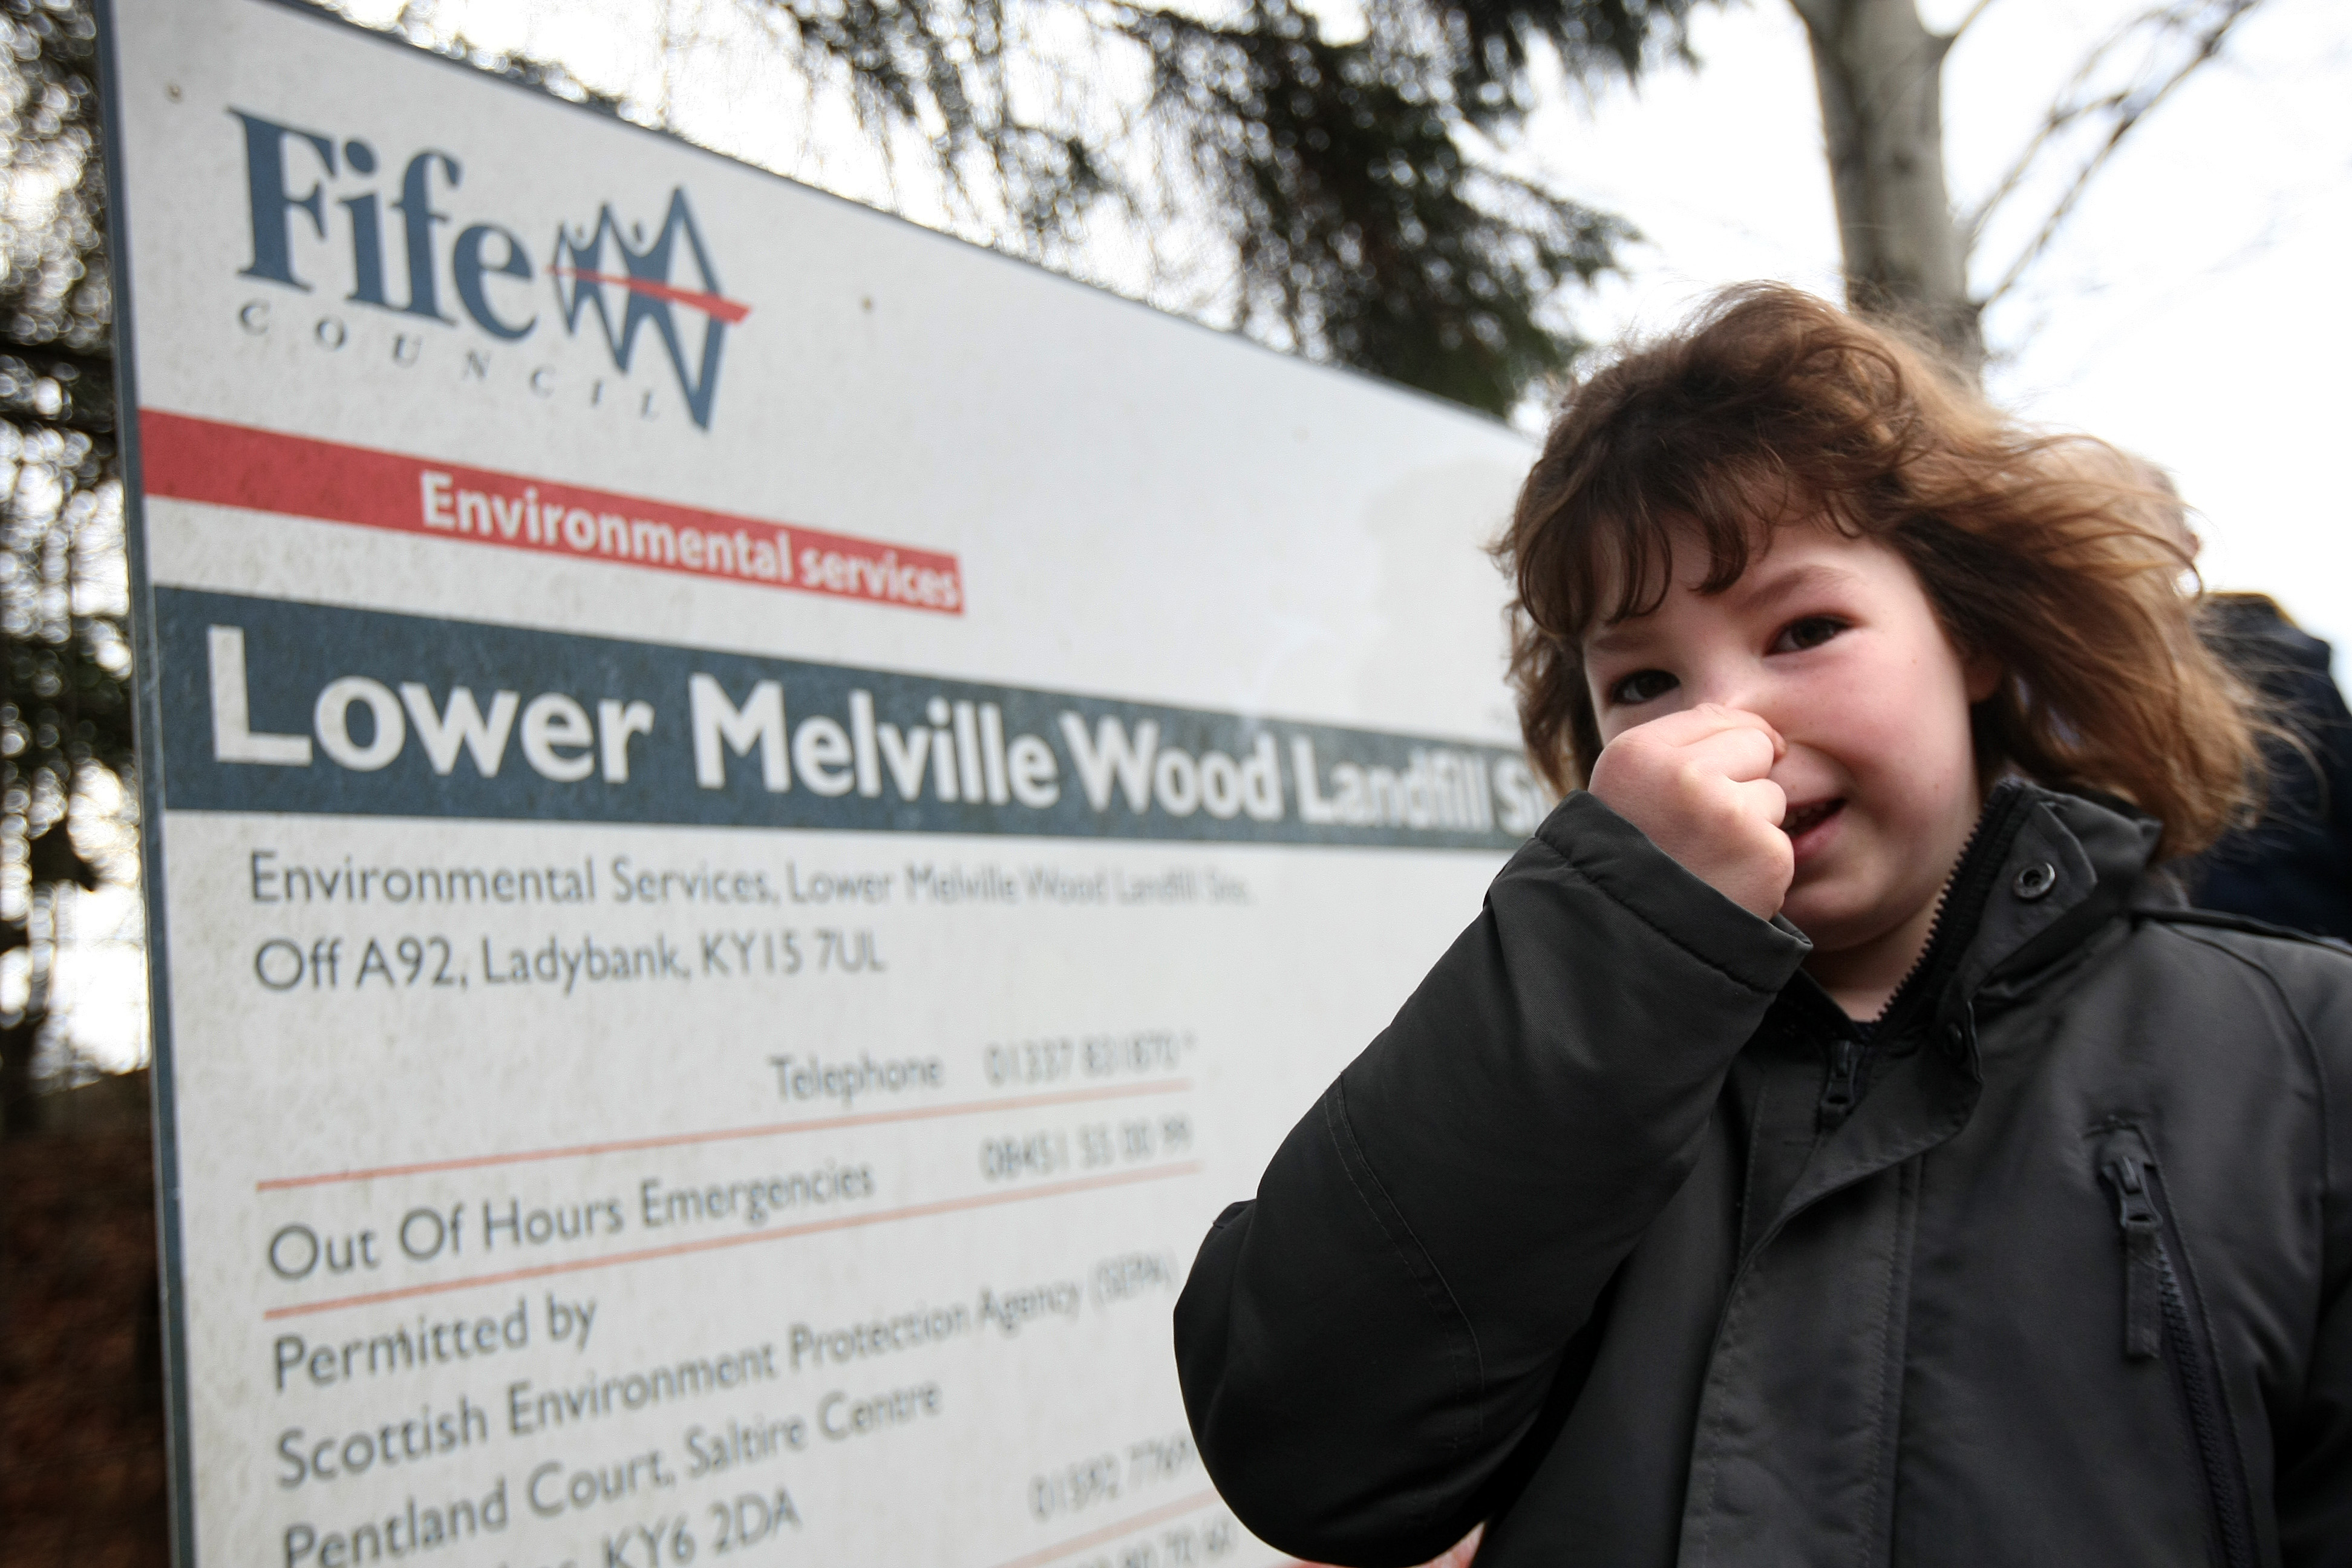 Residents of Letham in Fife are suffering from the 'Melville Pong' from the Lower Melville Wood Landfill site.